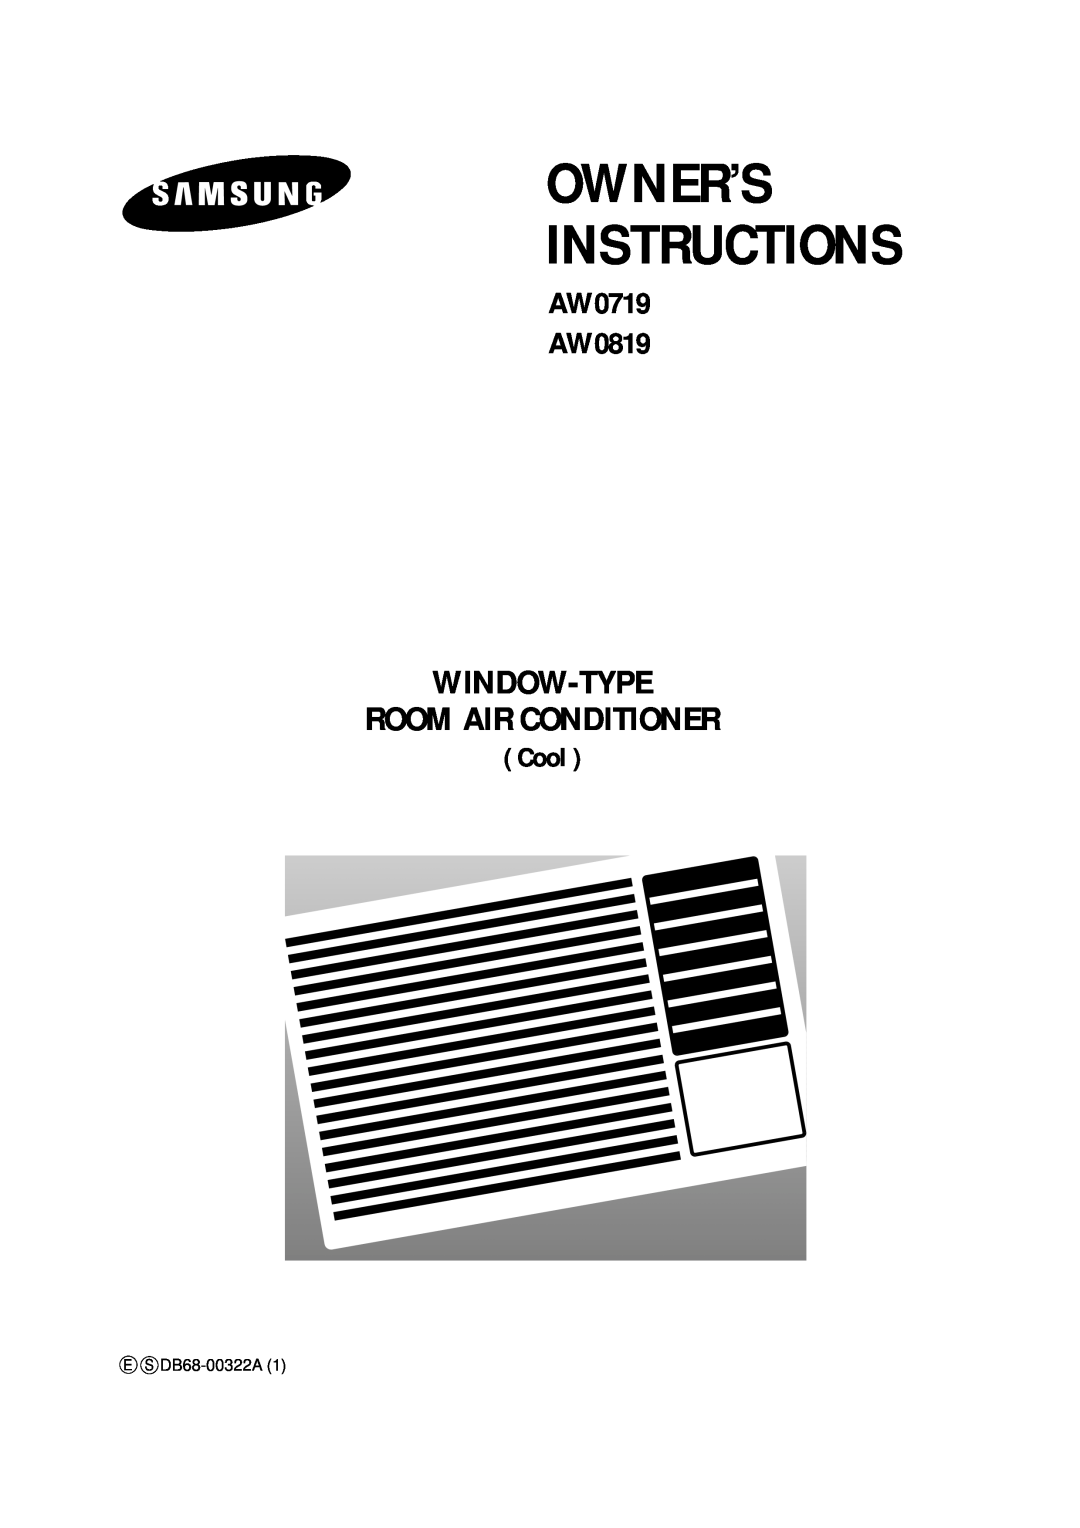 Samsung manual E S DB68-00322A1, Owner’S Instructions, Window-Type Room Air Conditioner, AW0719 AW0819, Cool 